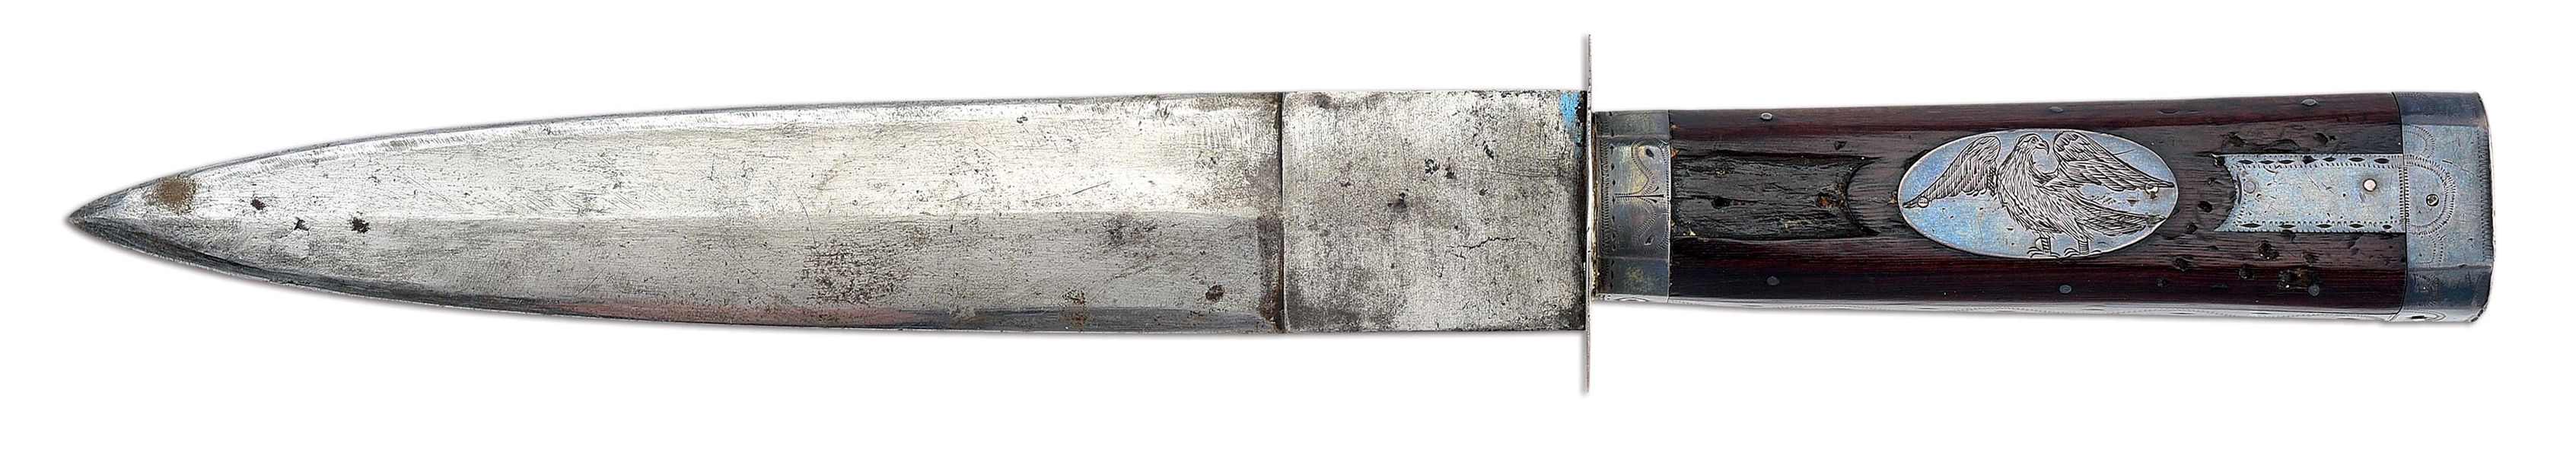 PATRIOTIC EARLY SILVER MOUNTED AMERICAN SCALPING KNIFE, EX. BILL GUTHMAN COLLECTION.